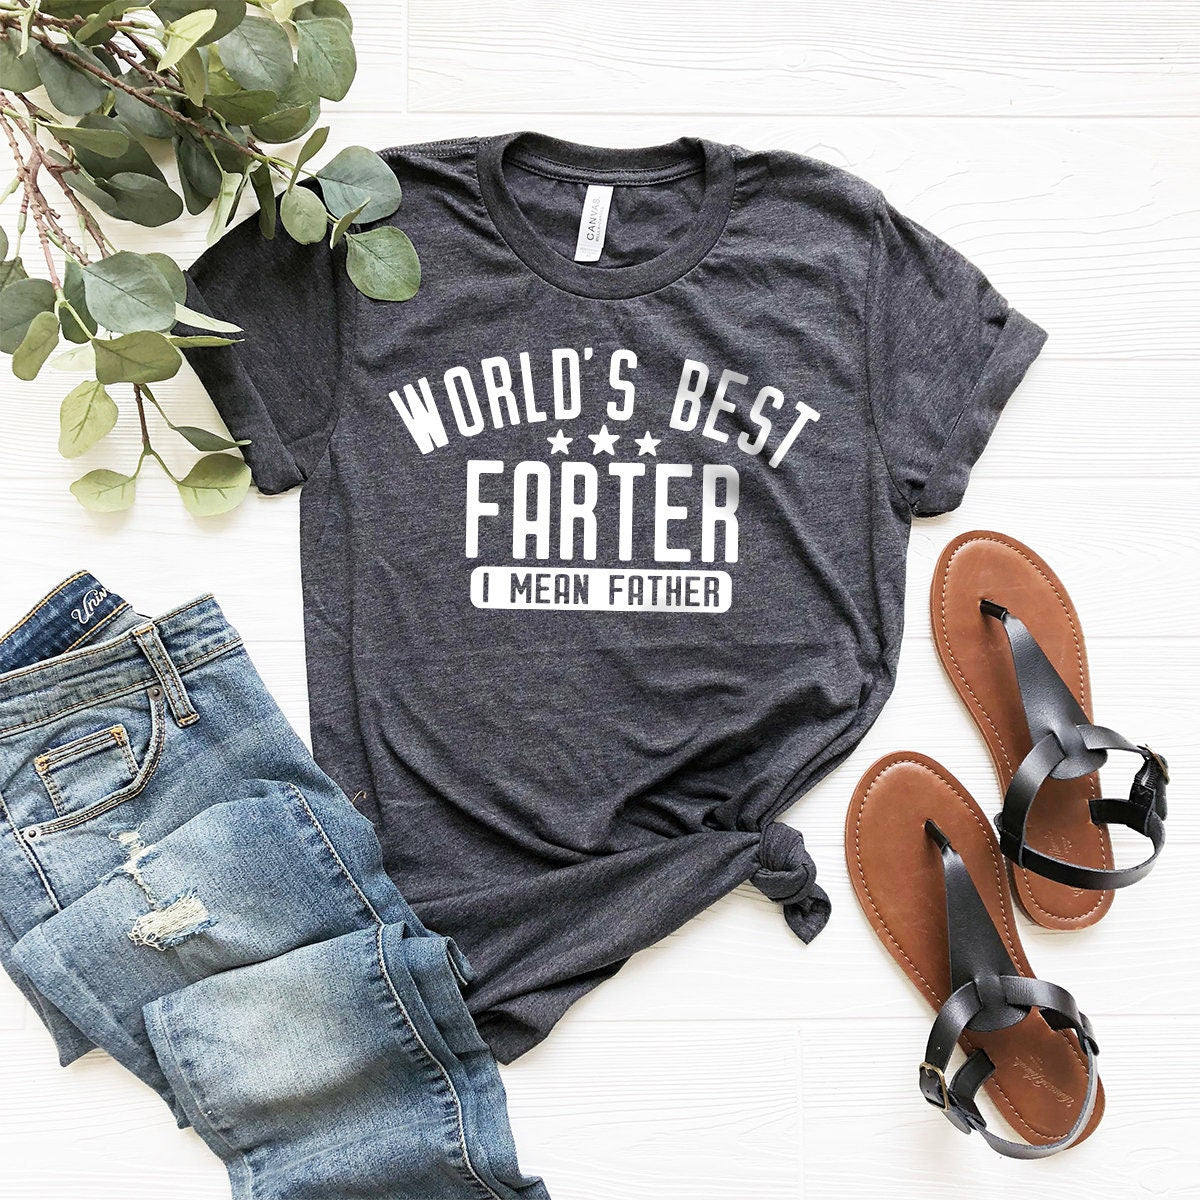 Father Humor Shirt, Farter Father Tee, World's Best Farter I Mean Fath –